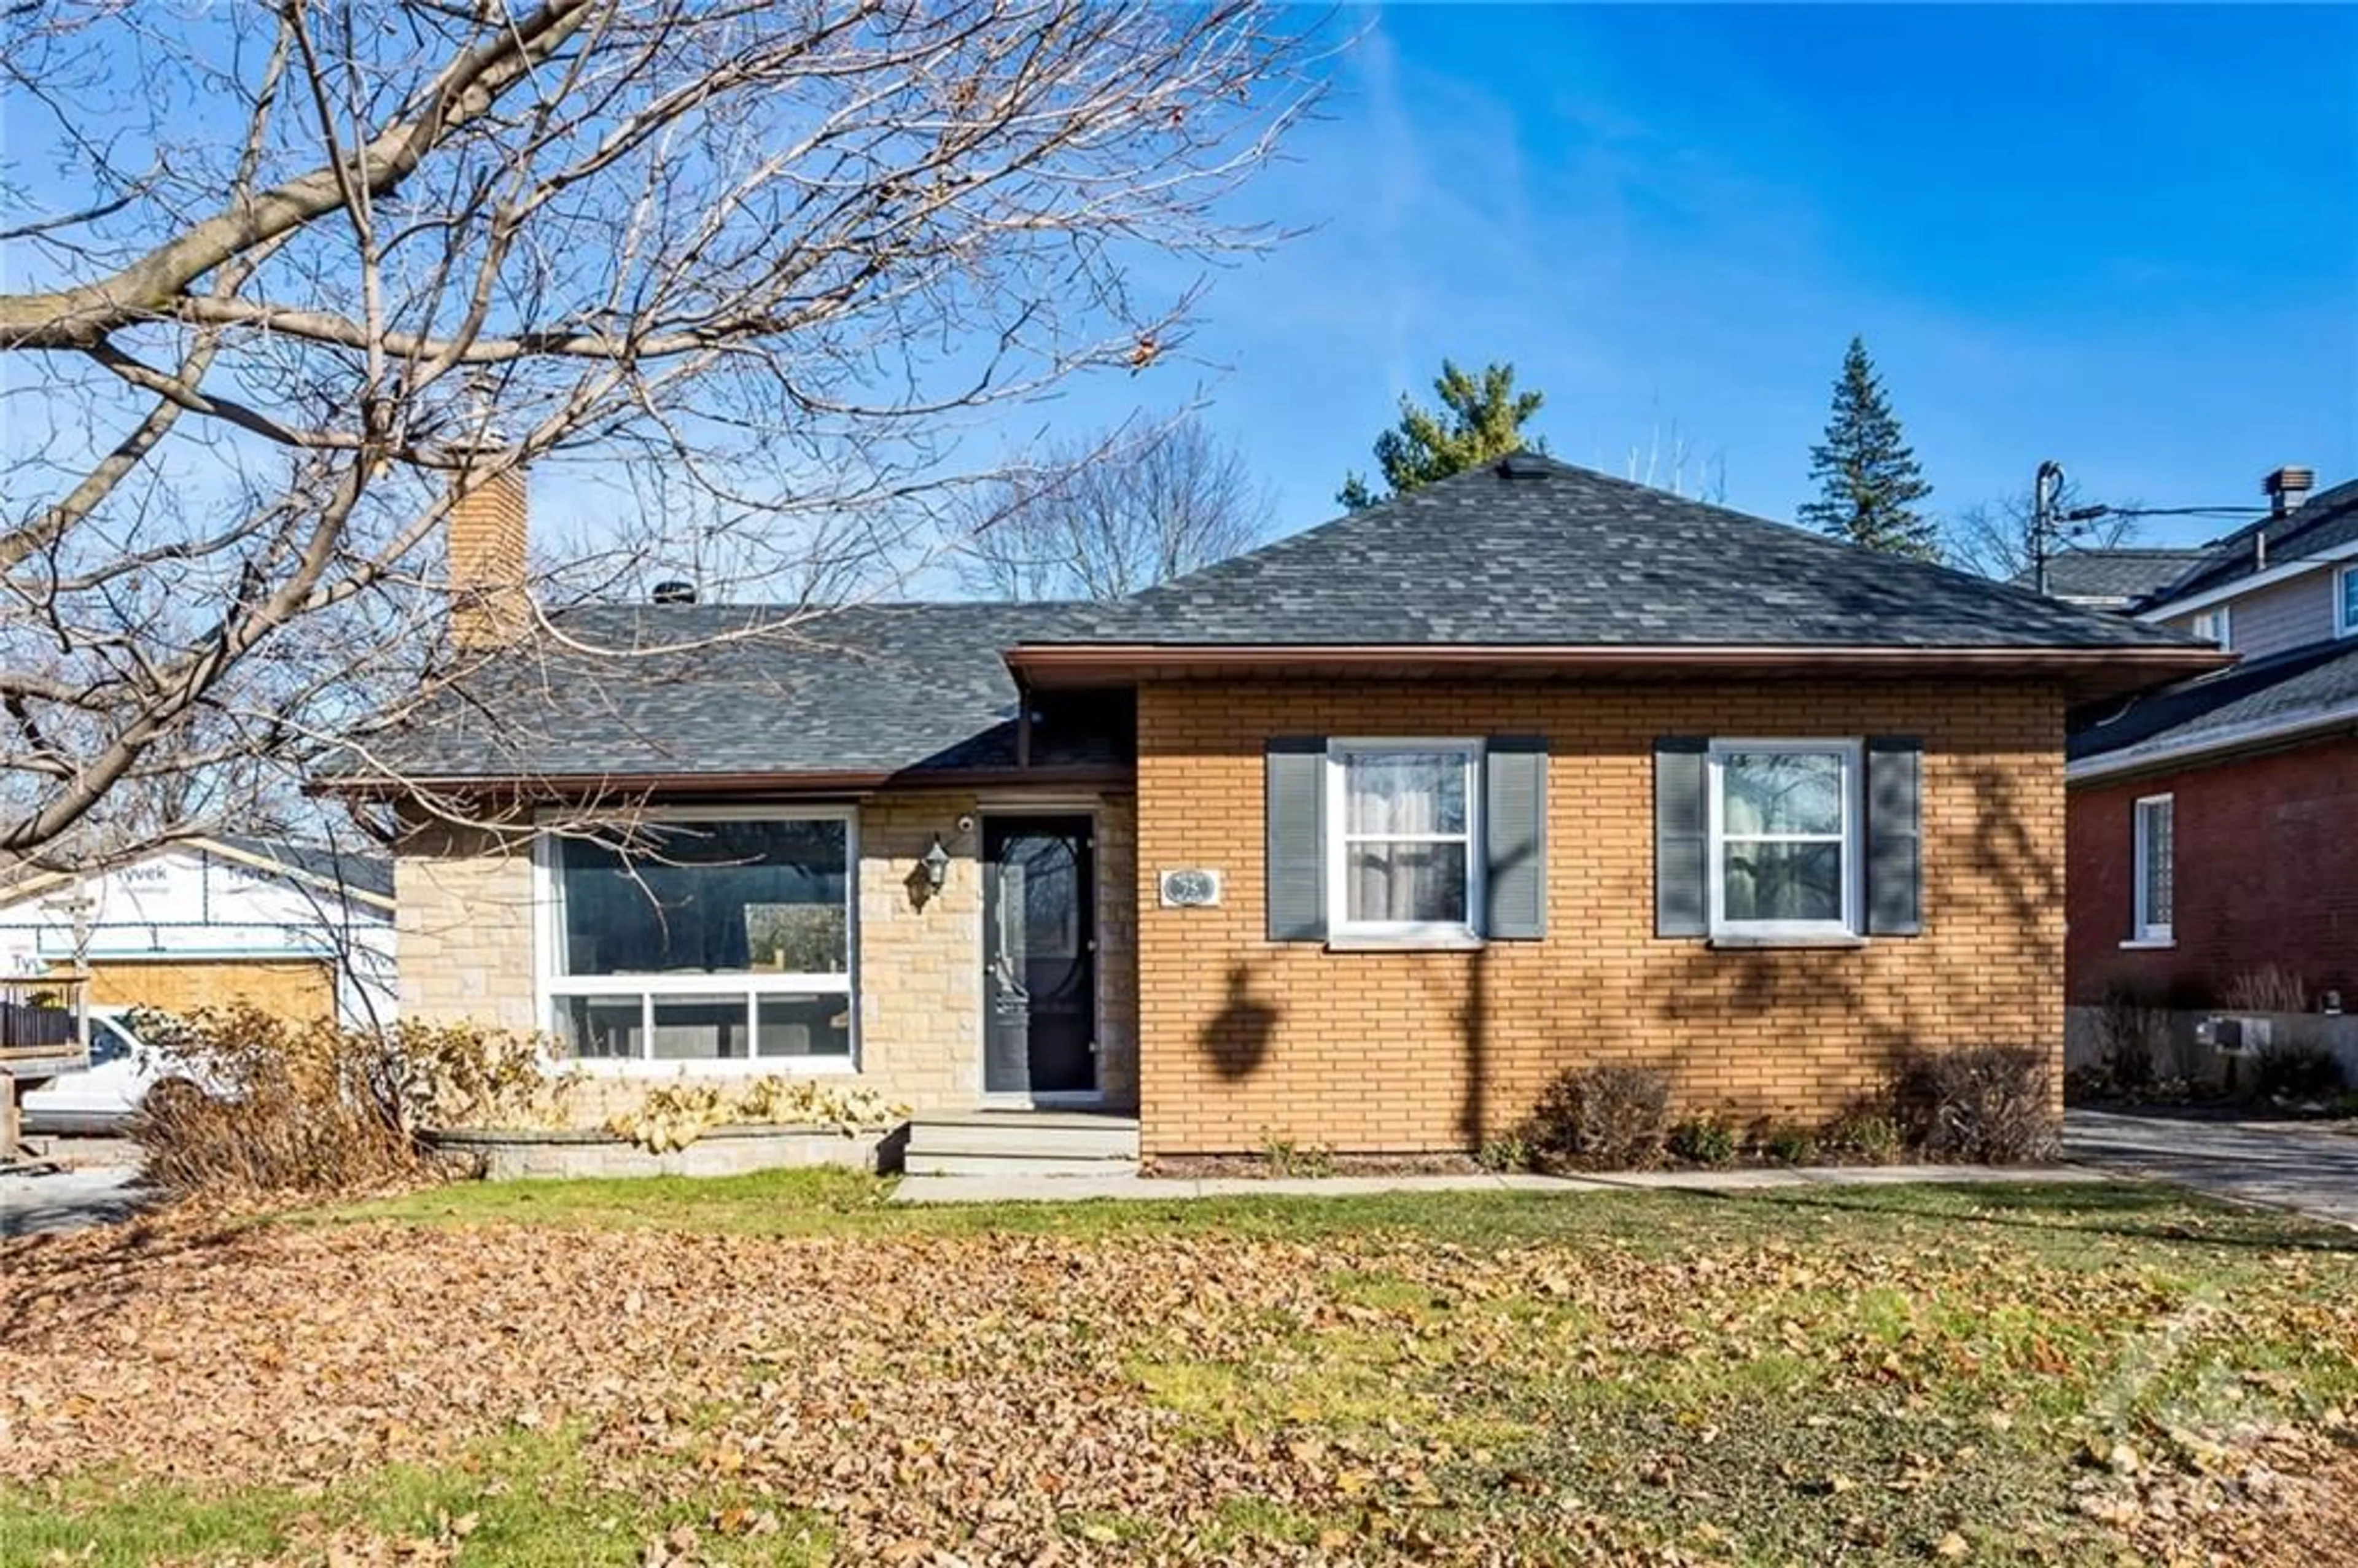 Home with brick exterior material for 75 WILSON St, Perth Ontario K7H 2N7